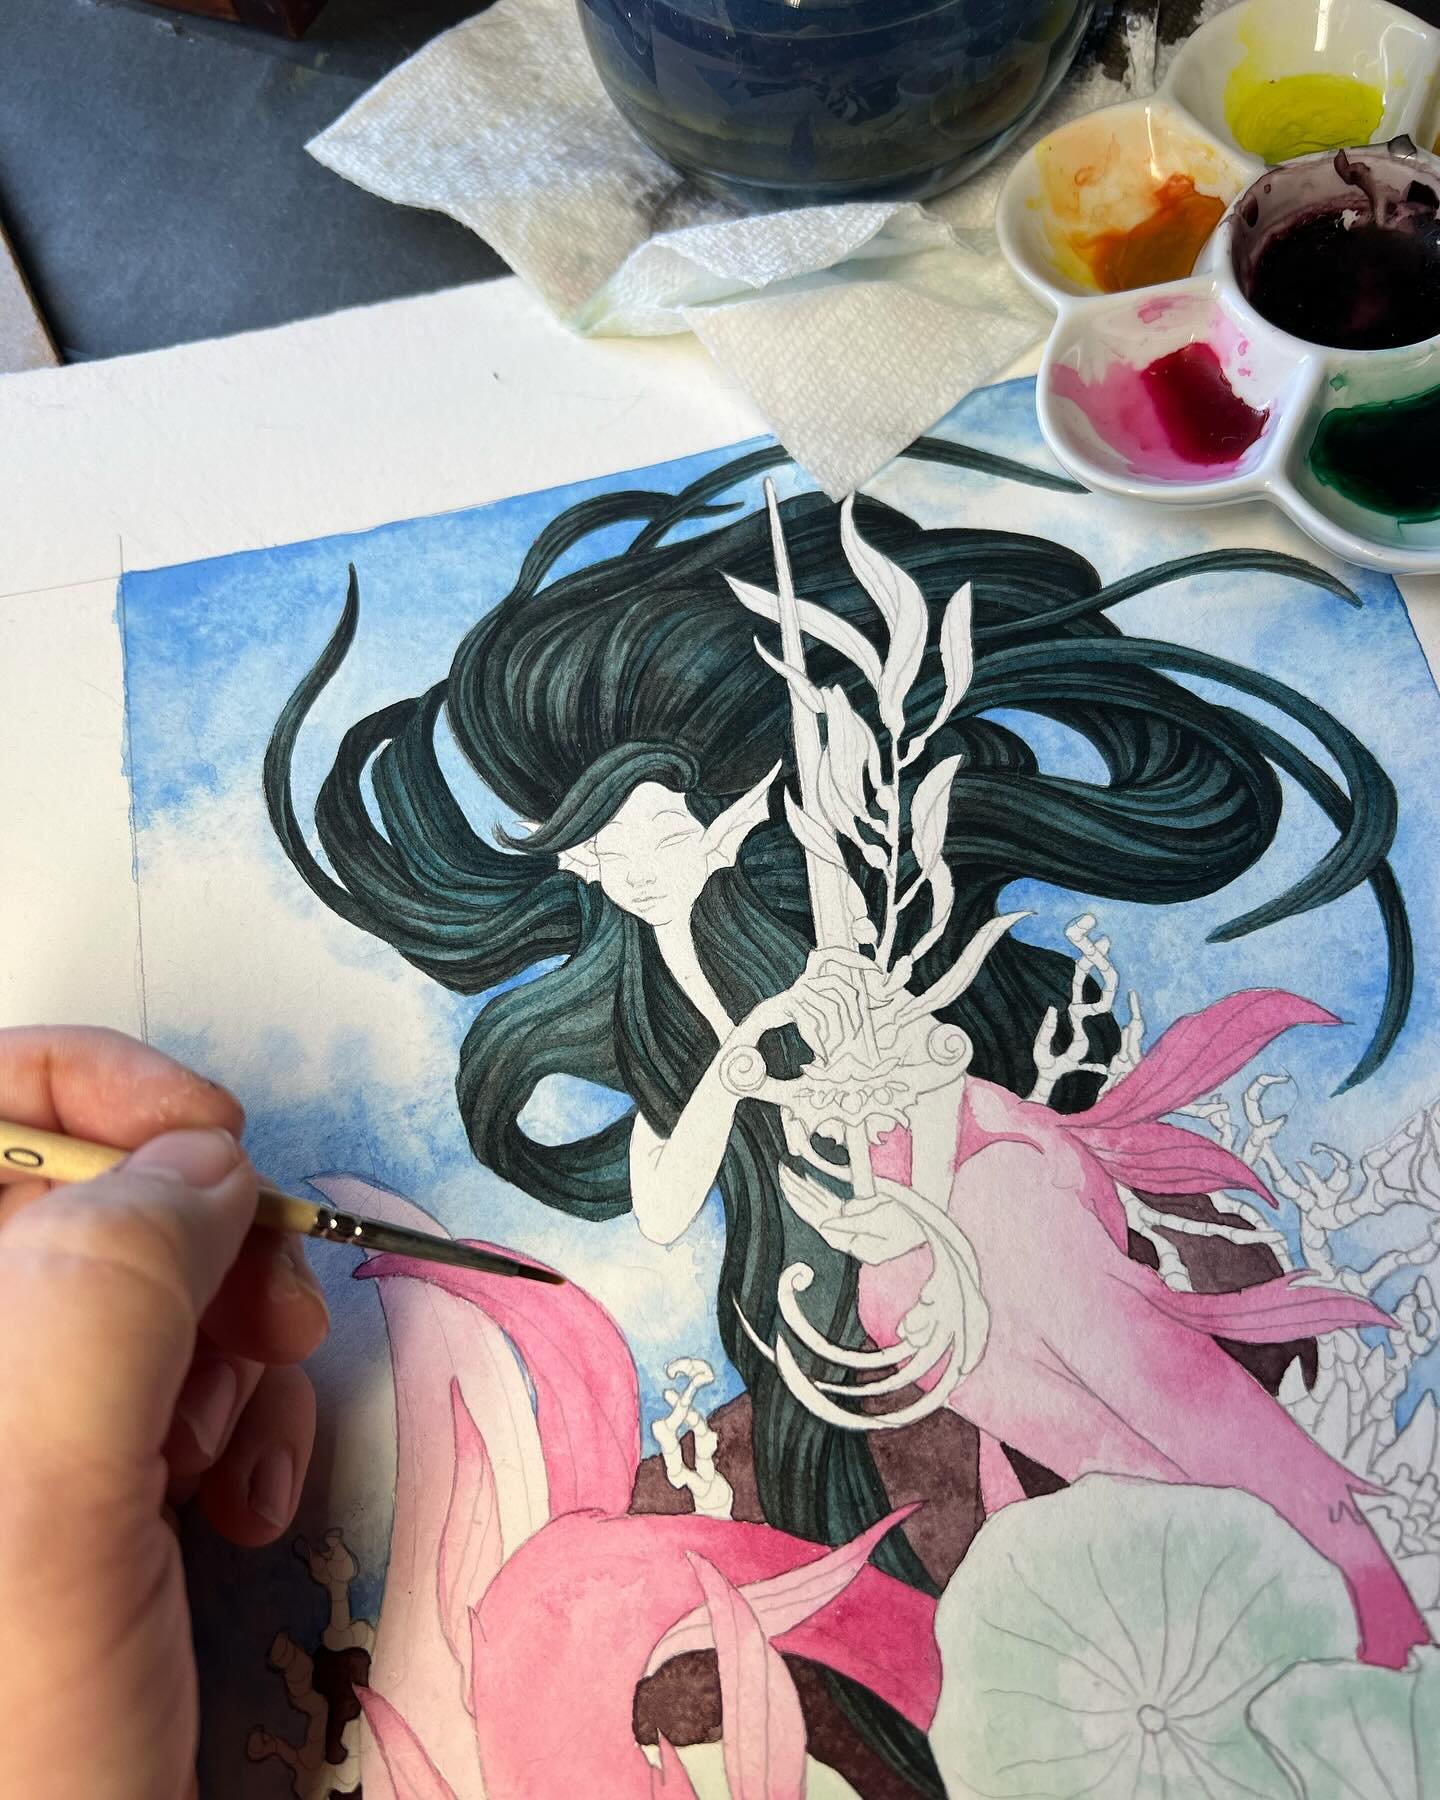 💛 Slowly building up colors on my Ace of Swords watercolor painting for @78tarot 🩷 

#aceofswords #78tarot #tarot #tarotart #tarotcard #mermaid #mermaidhair #mermay2024 #mermay #mermaidcore #watercolor #handmadewithlove #watercolorpainting #workinp